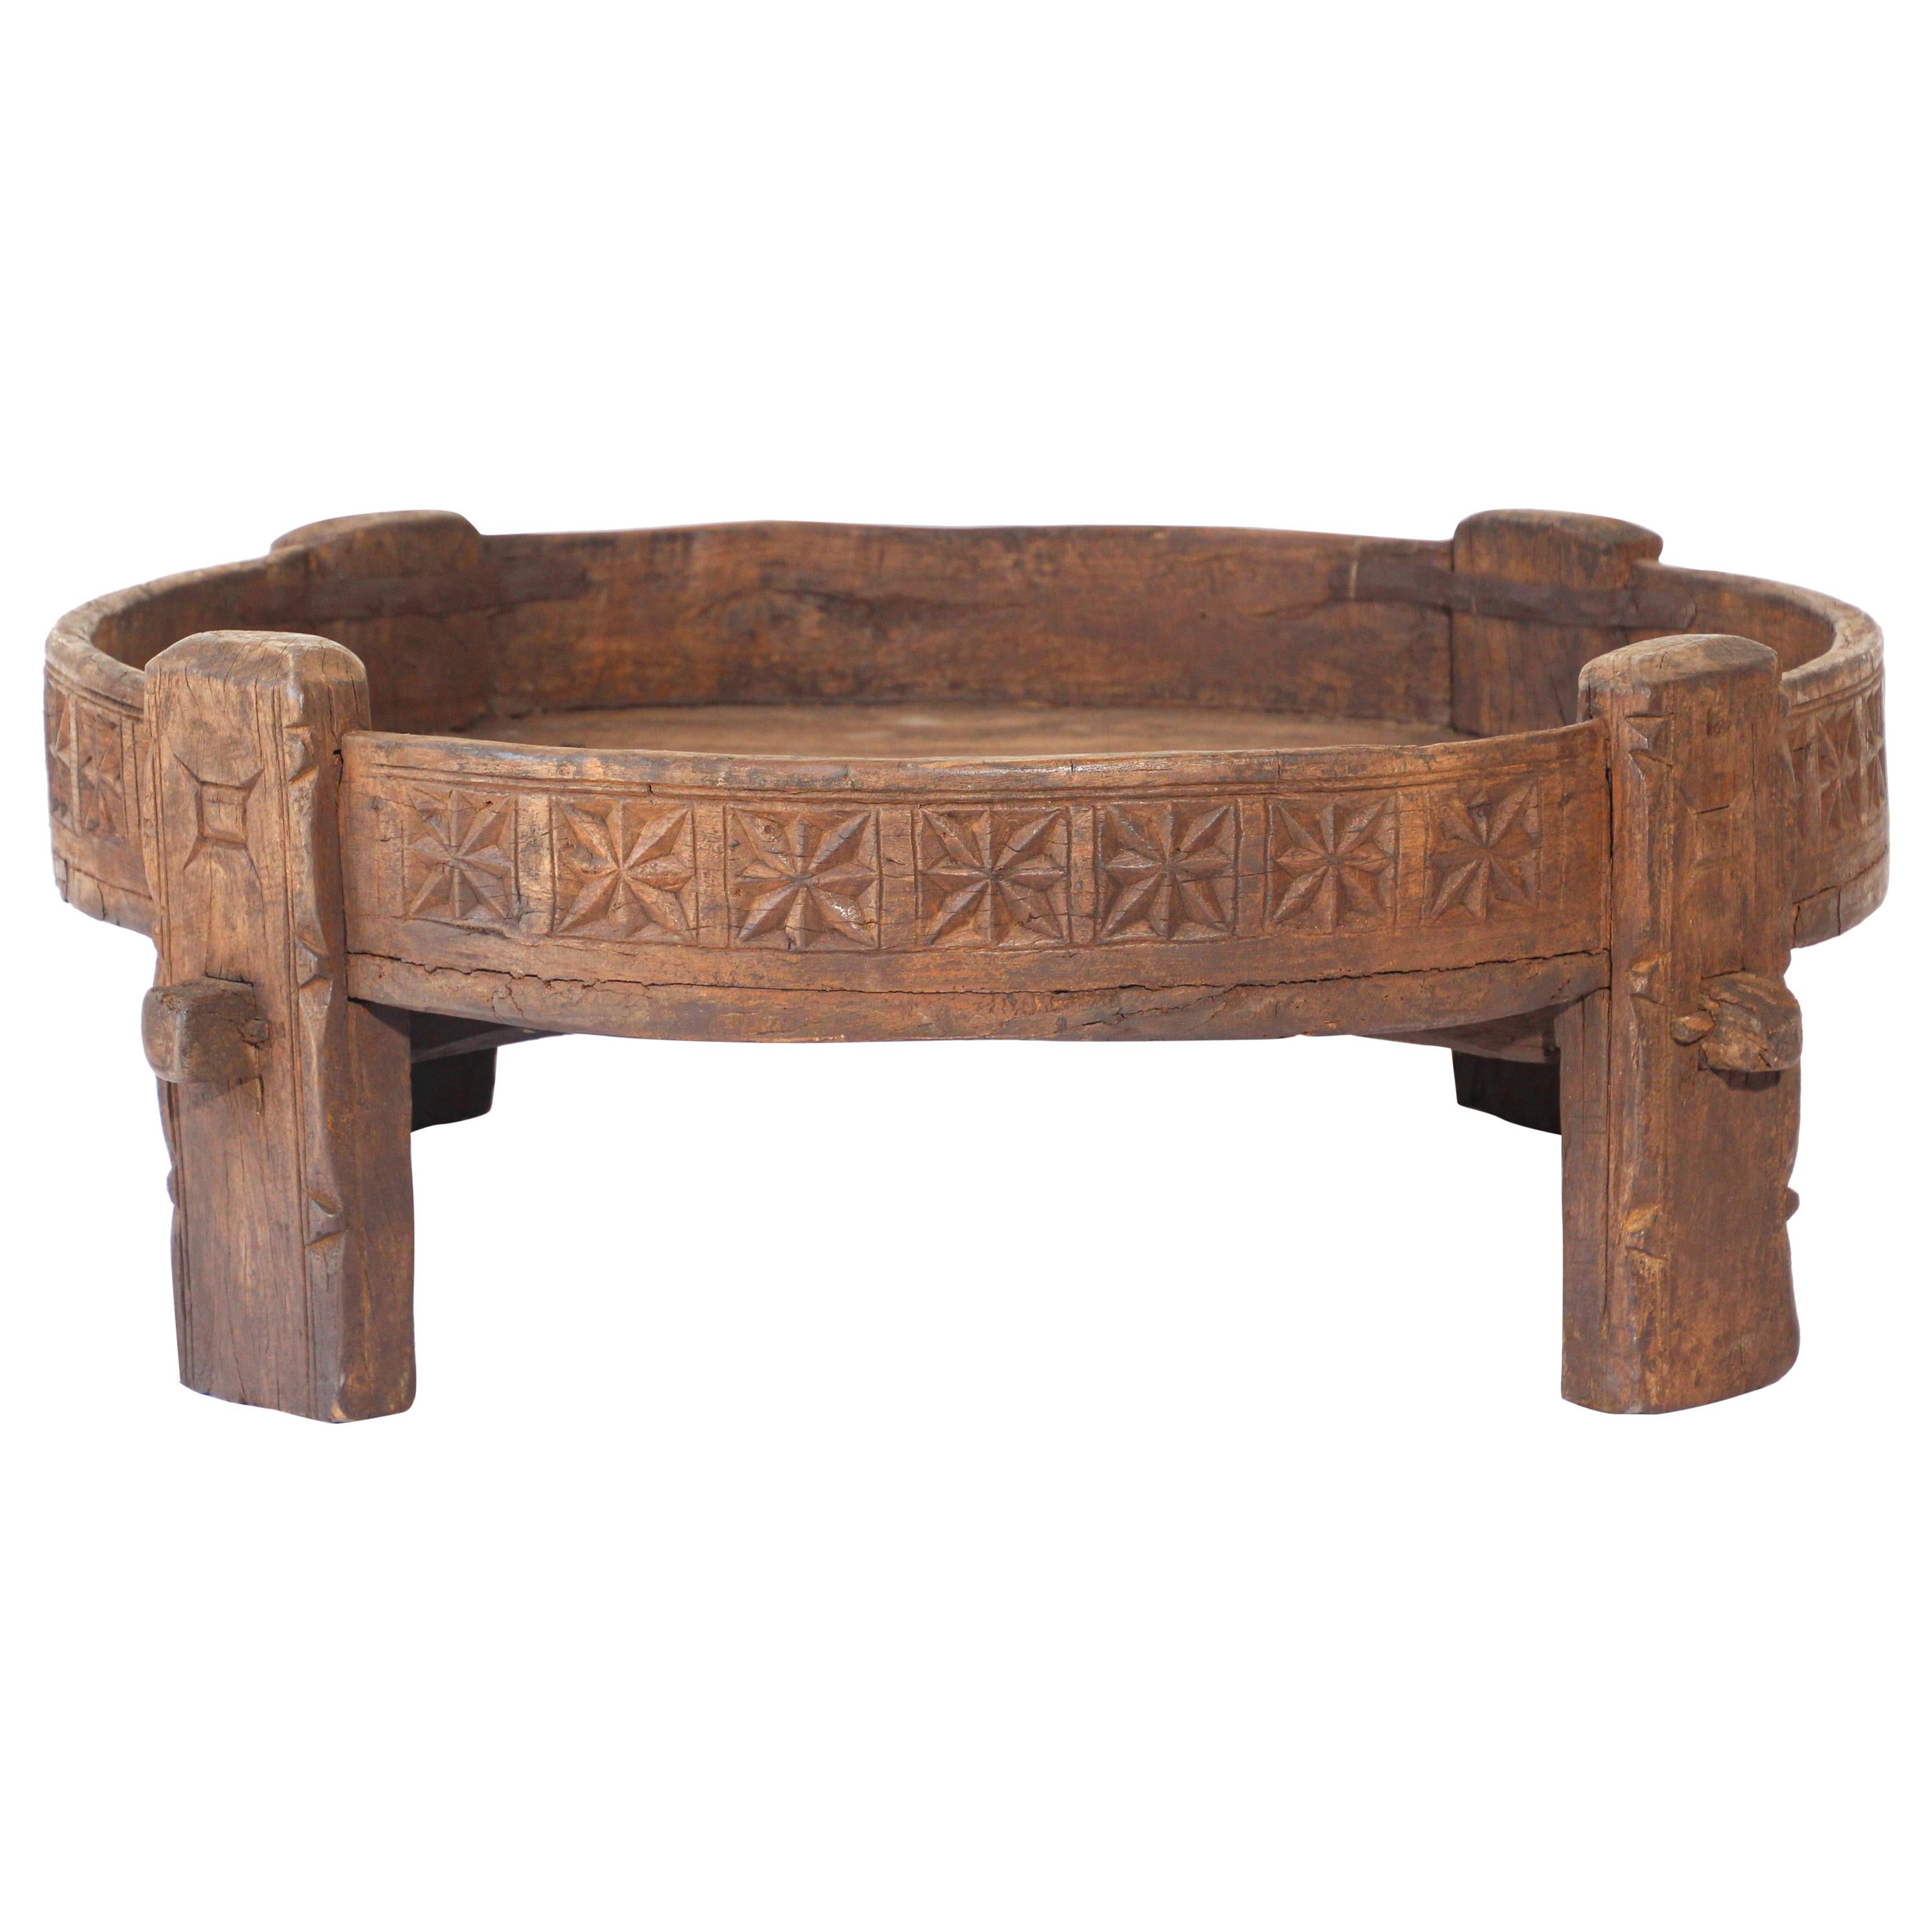 Antique Round Tribal Grinder Low Table